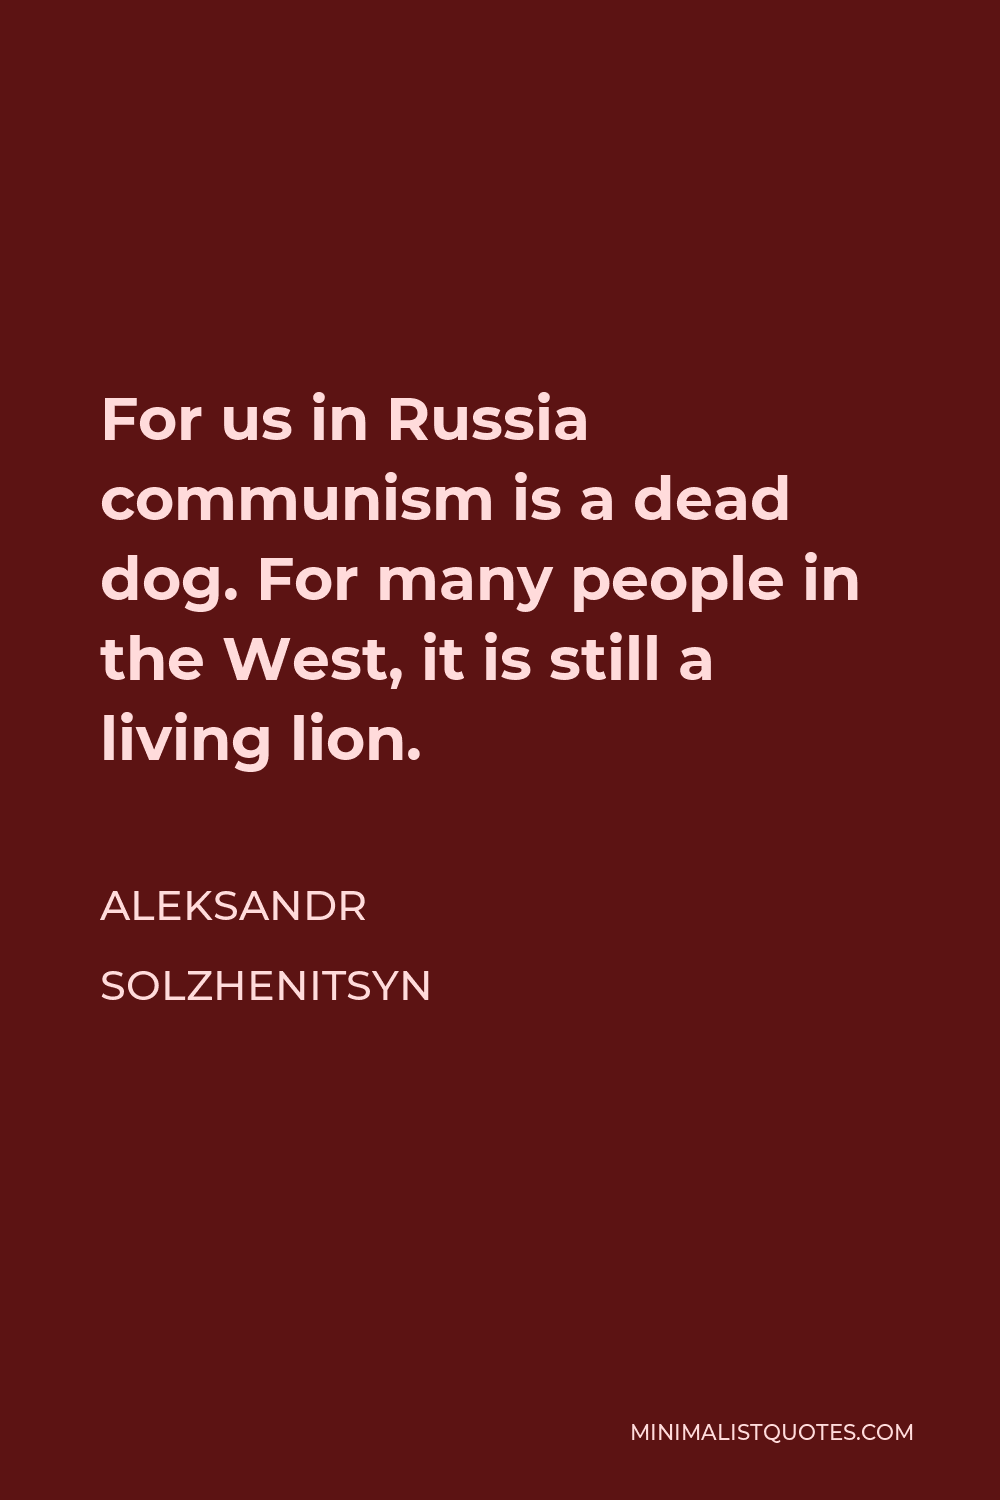 Aleksandr Solzhenitsyn Quote - For us in Russia communism is a dead dog. For many people in the West, it is still a living lion.